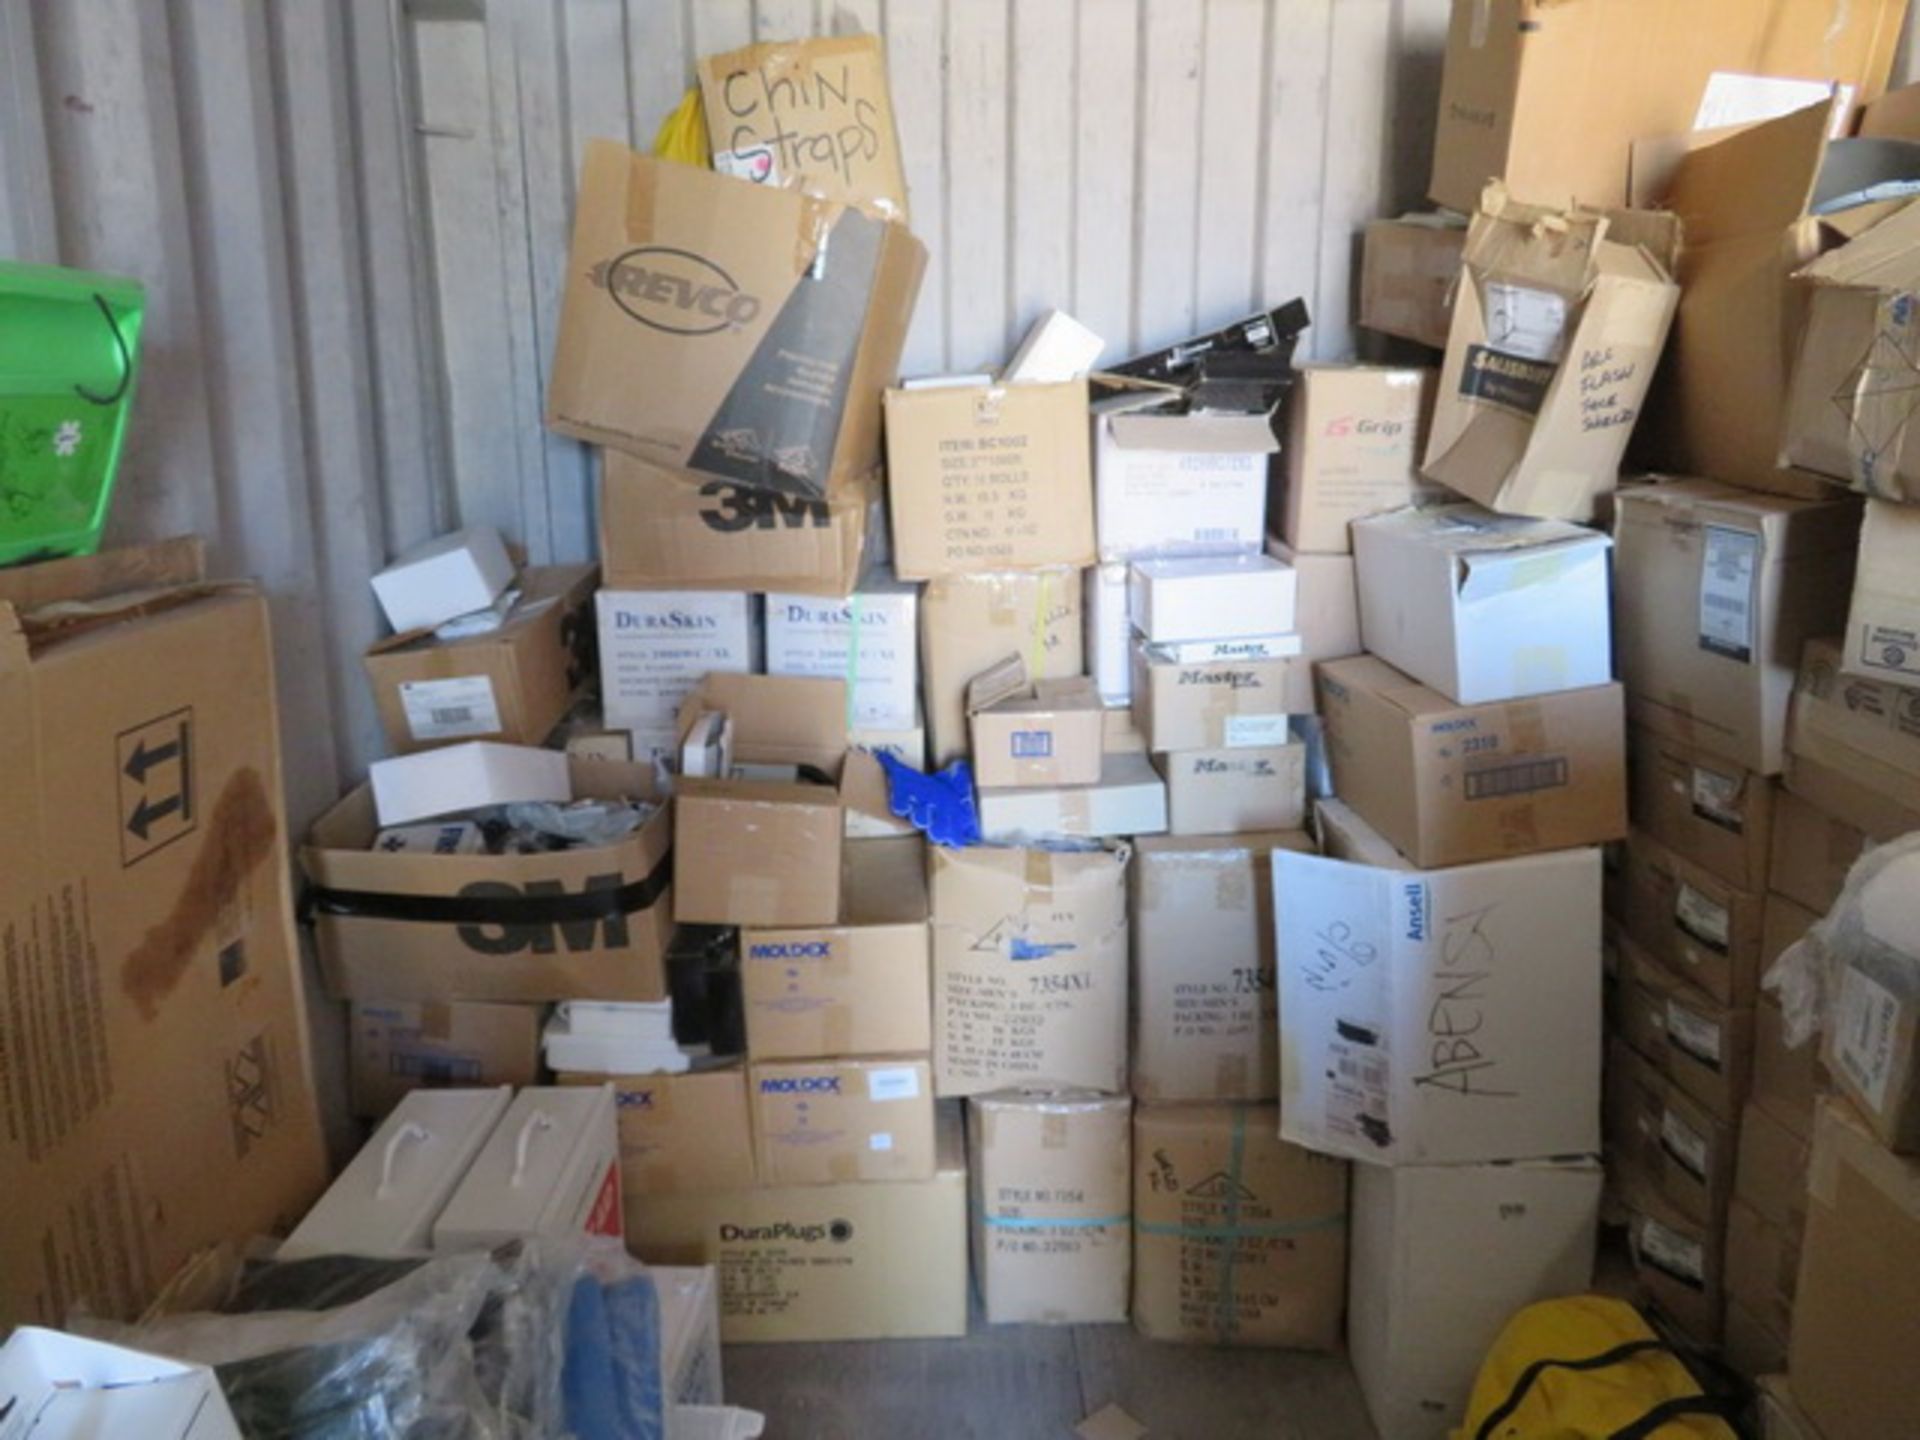 Contents of Shipping Container. To Include 1/2" PVDF Tubing, Safety Glasses, Safety Signs, - Image 23 of 51